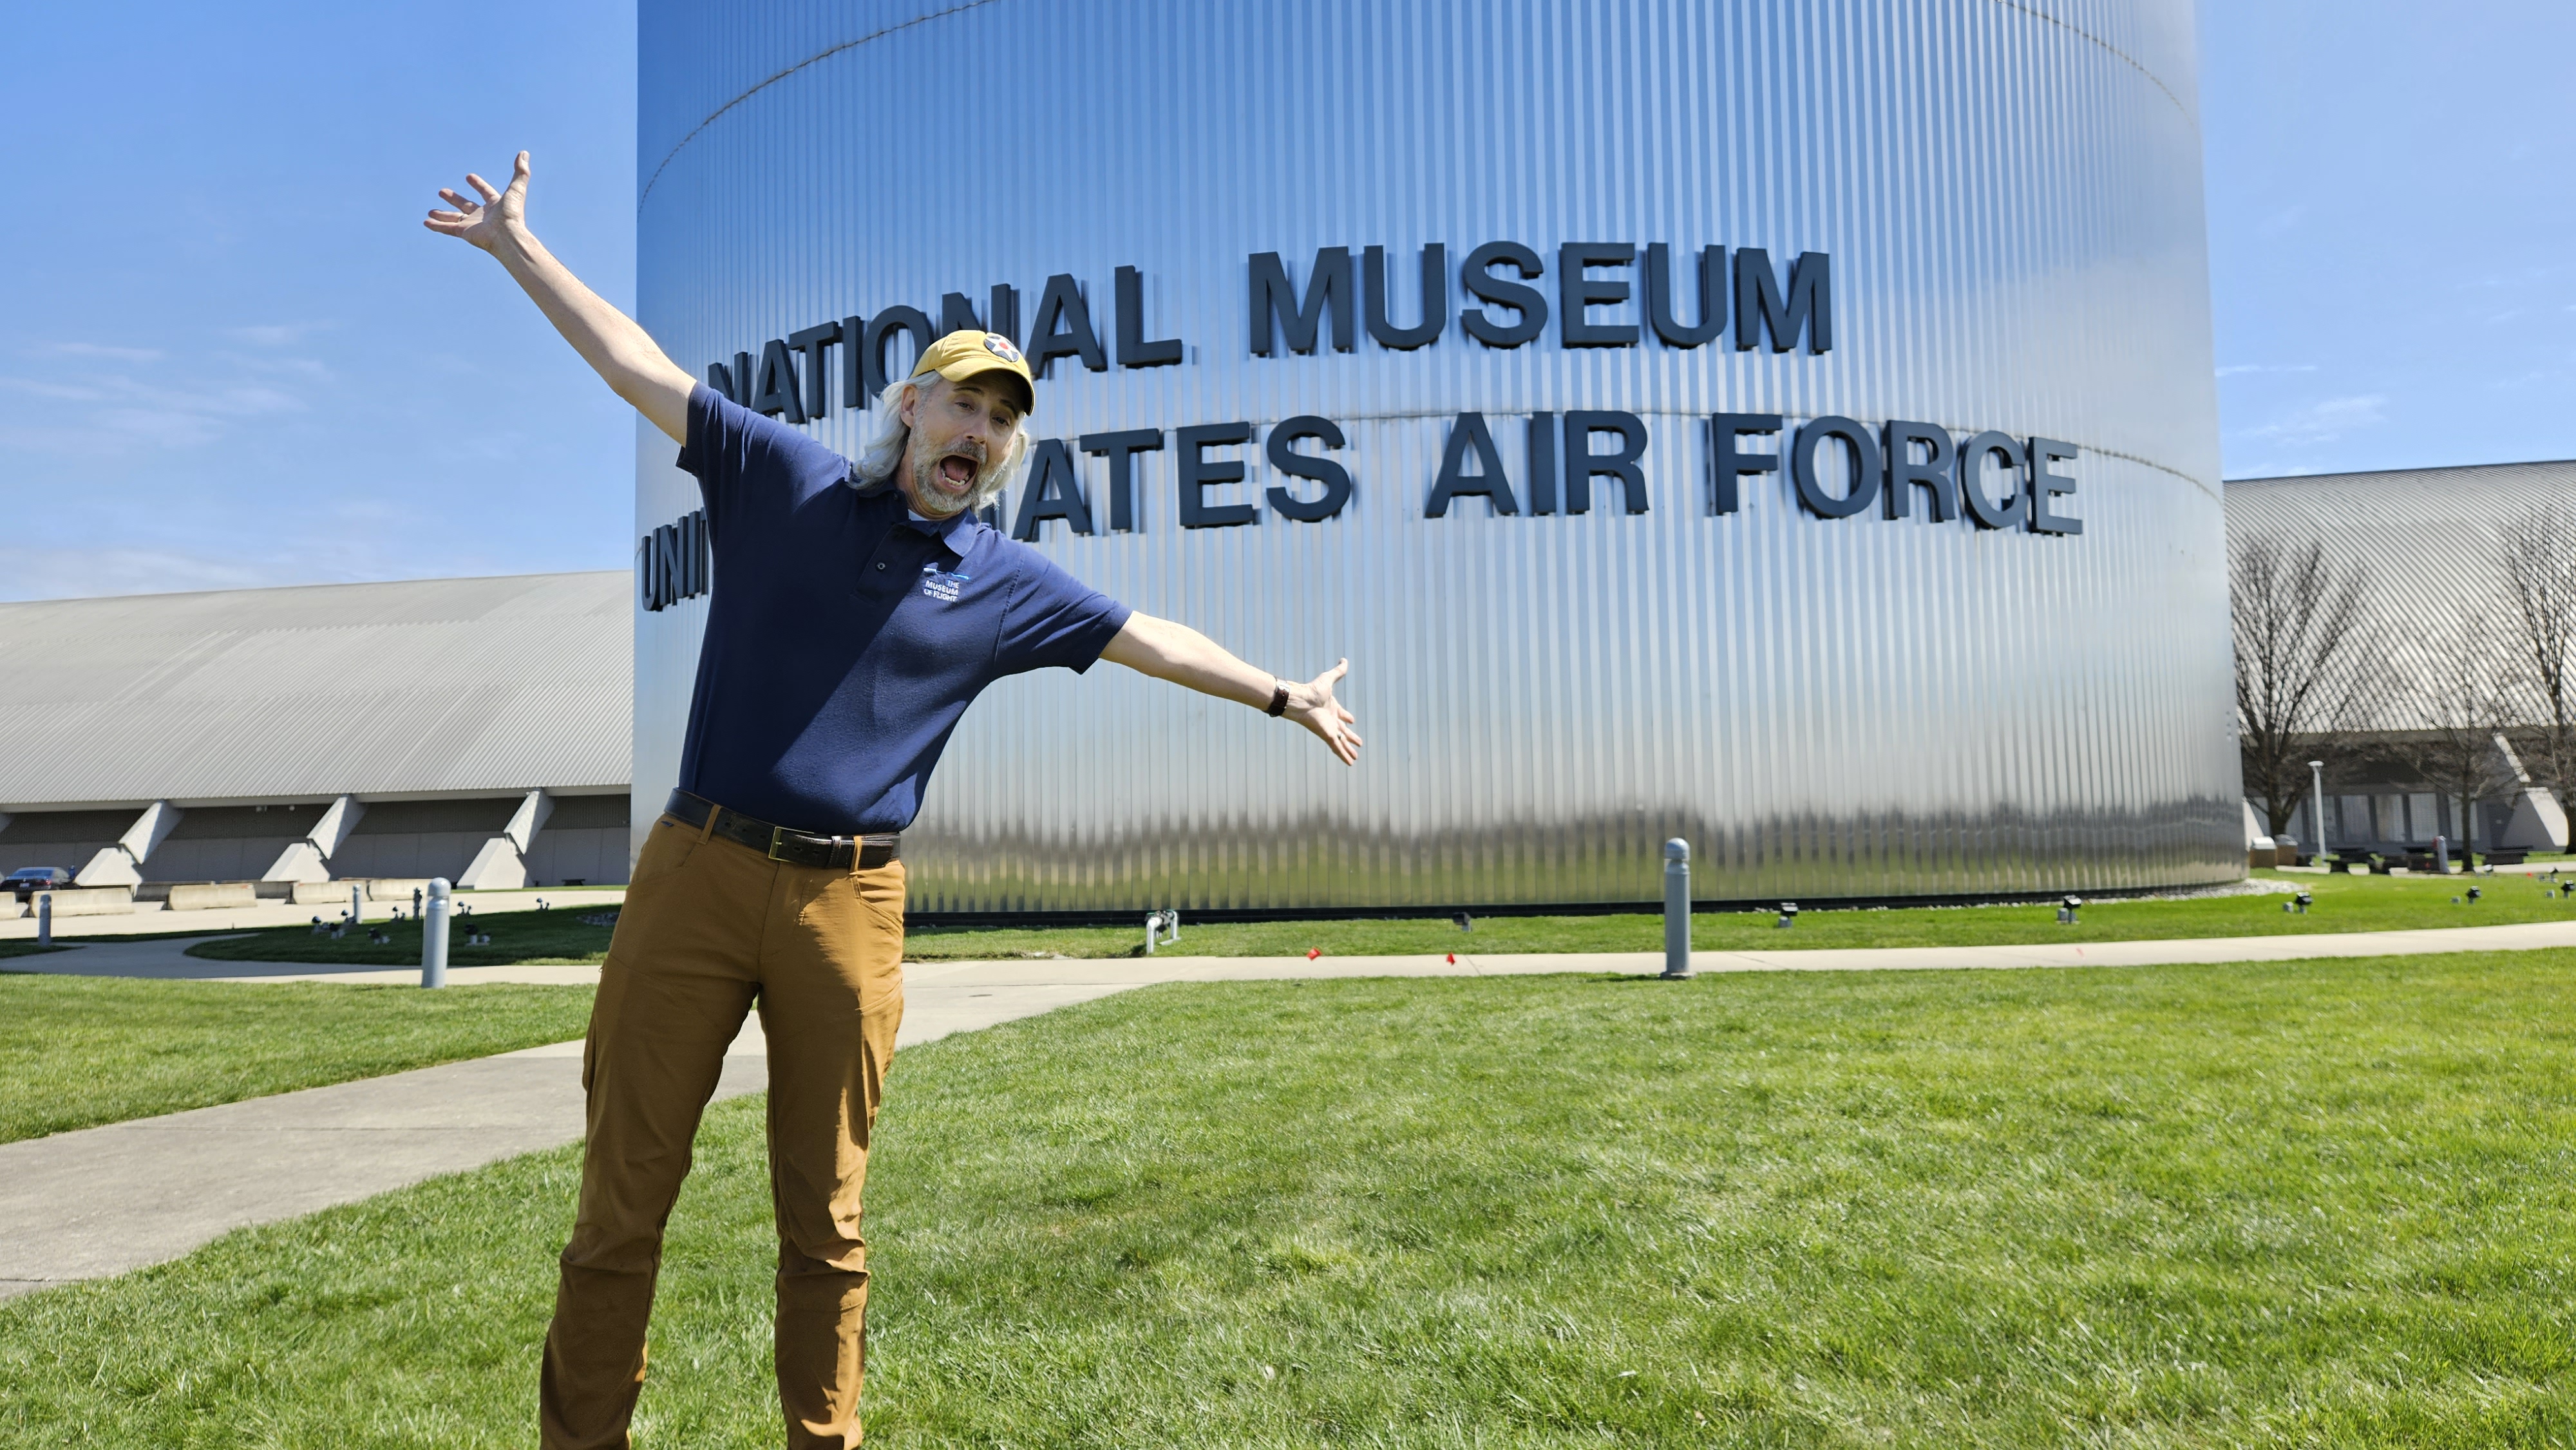 Featured image: Matthew Burchette posing in front of the National Museum of the United States Air Force. - Read full post: Behind the Scenes at the National Museum of the US Air Force